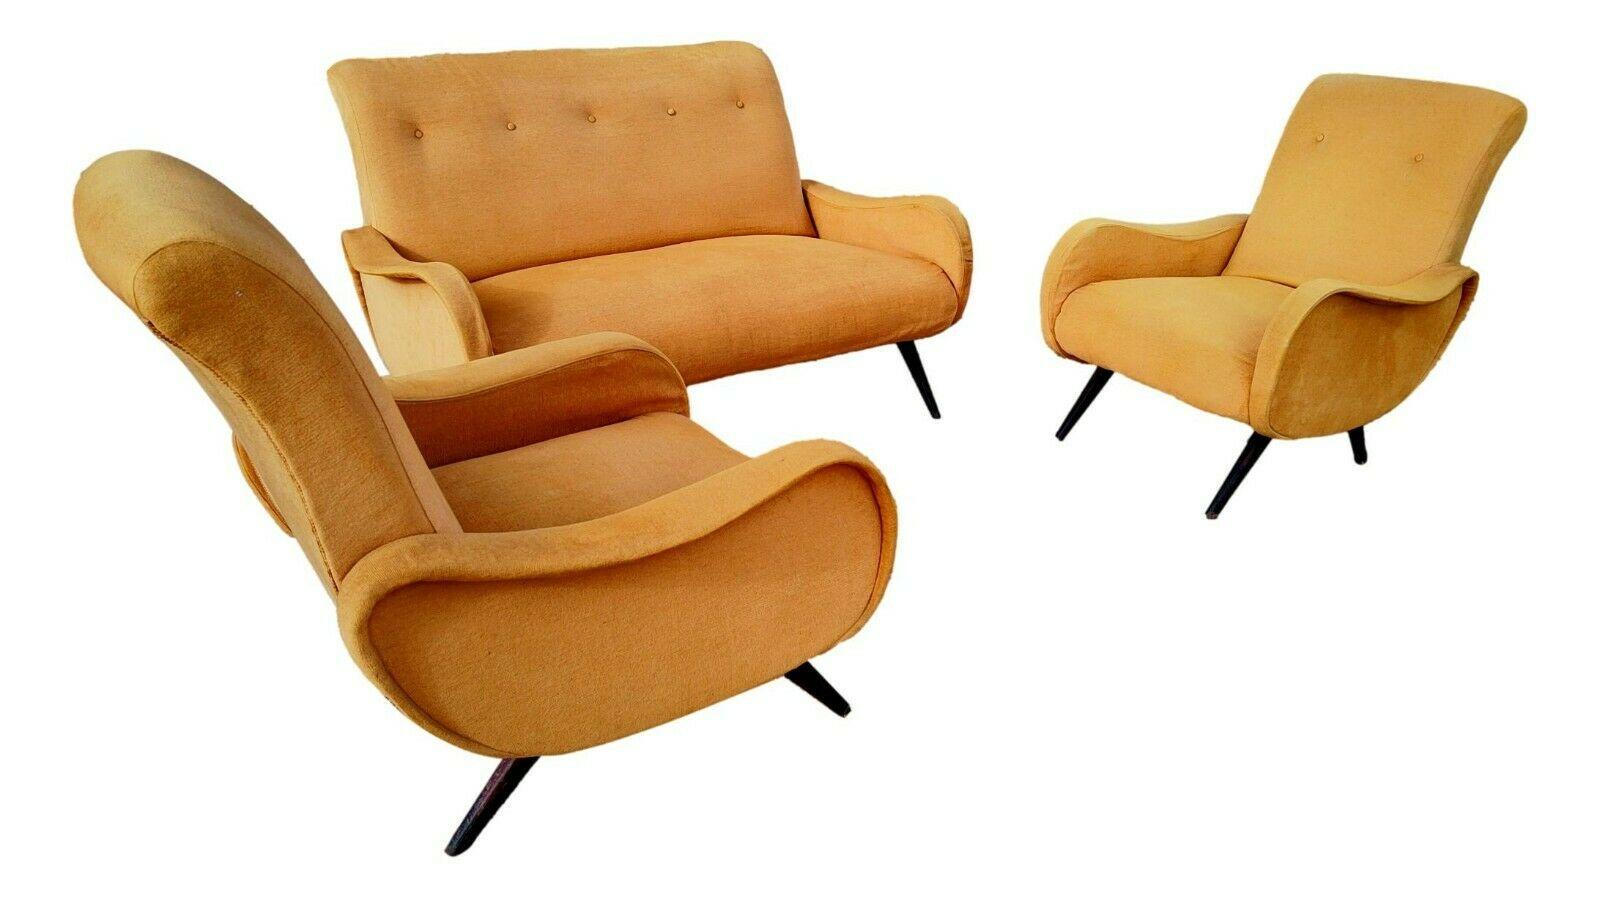 Complete original lounge from the 1960s, consisting of a two-seater sofa and a pair of 